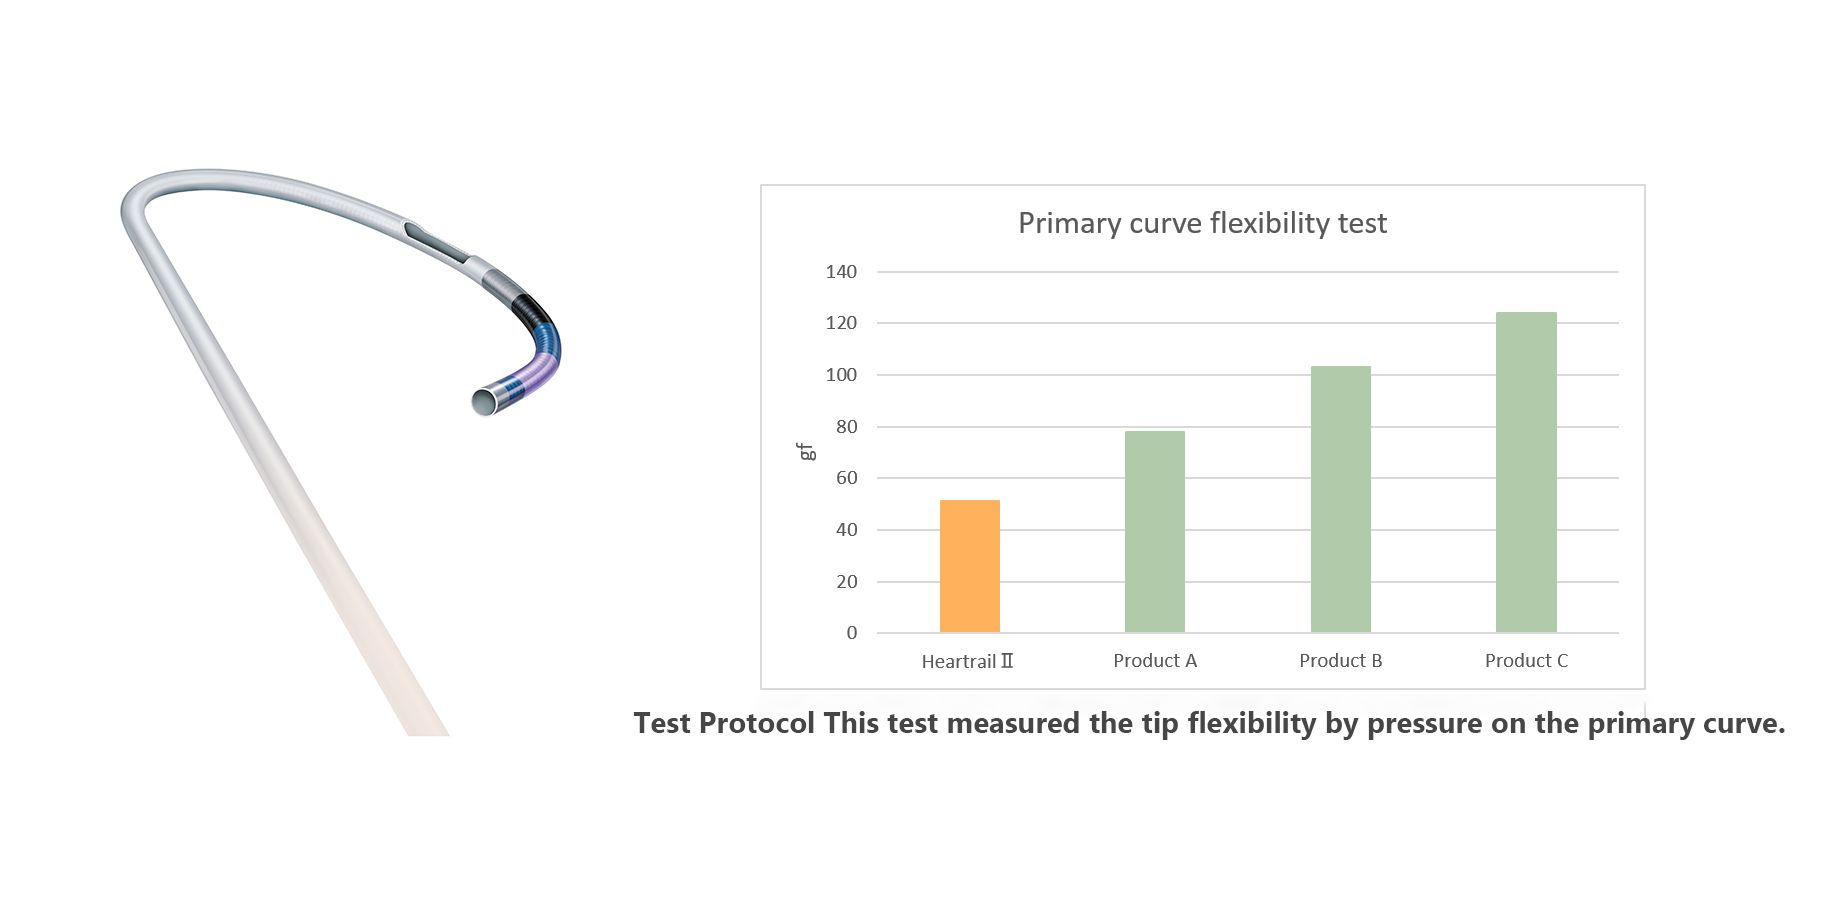 Primary curve flexibility test chart of Heartrail (image)